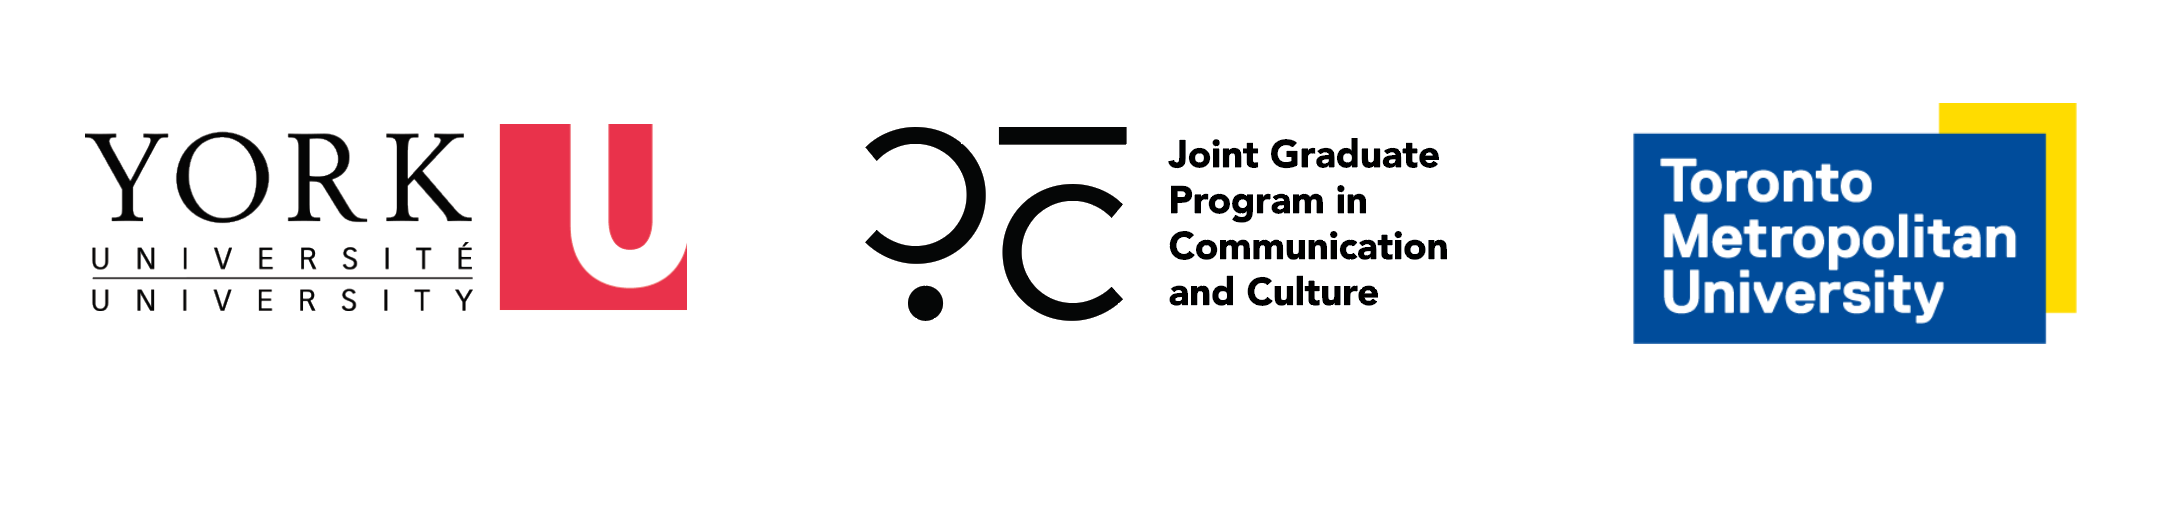 A joint graduate program in communication and culture with Ryerson University and York University